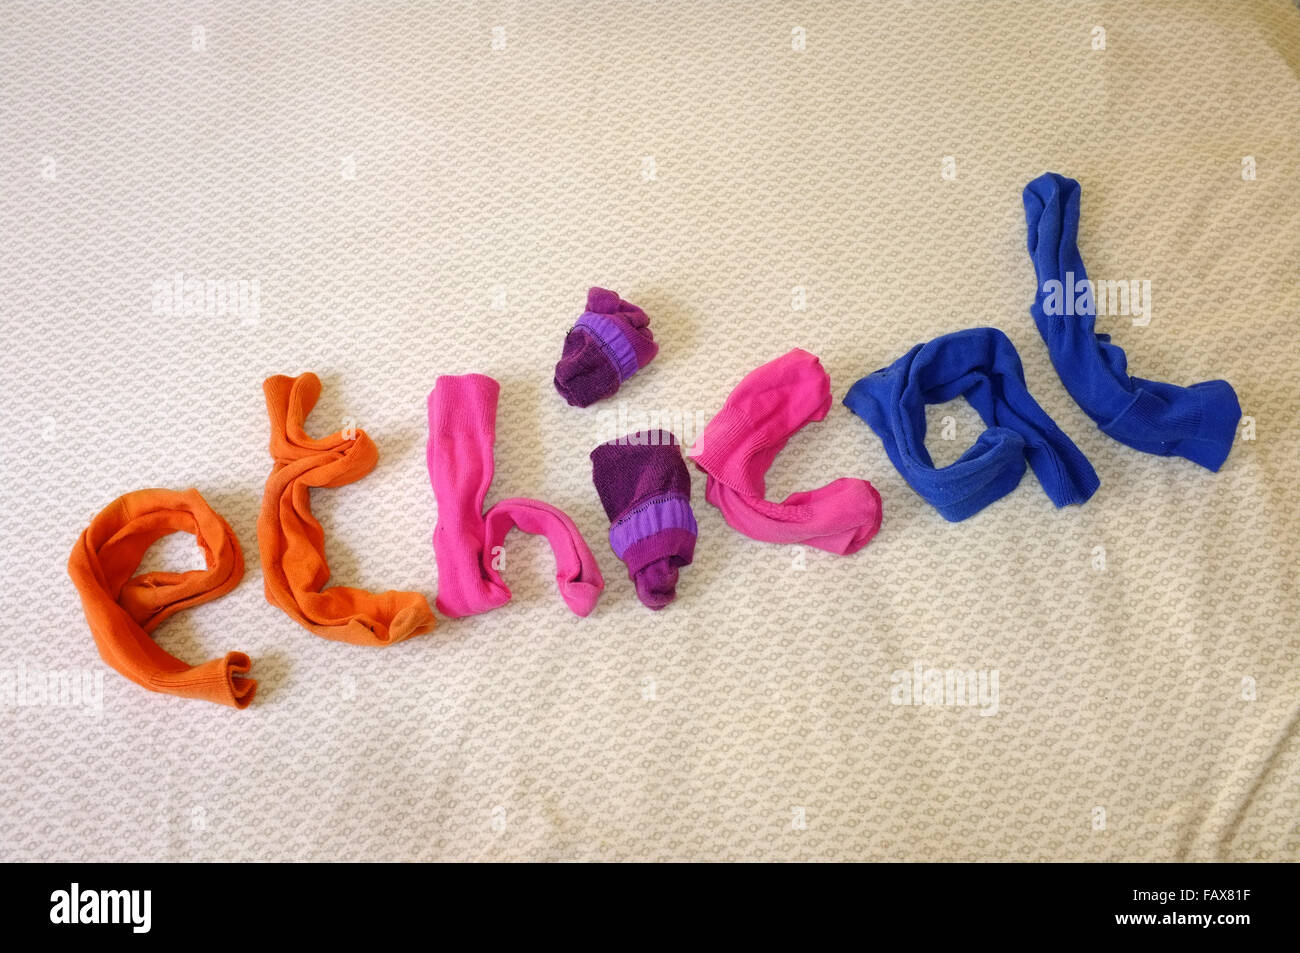 The word ethical made out of colourful socks laying on a duvet cover. Stock Photo